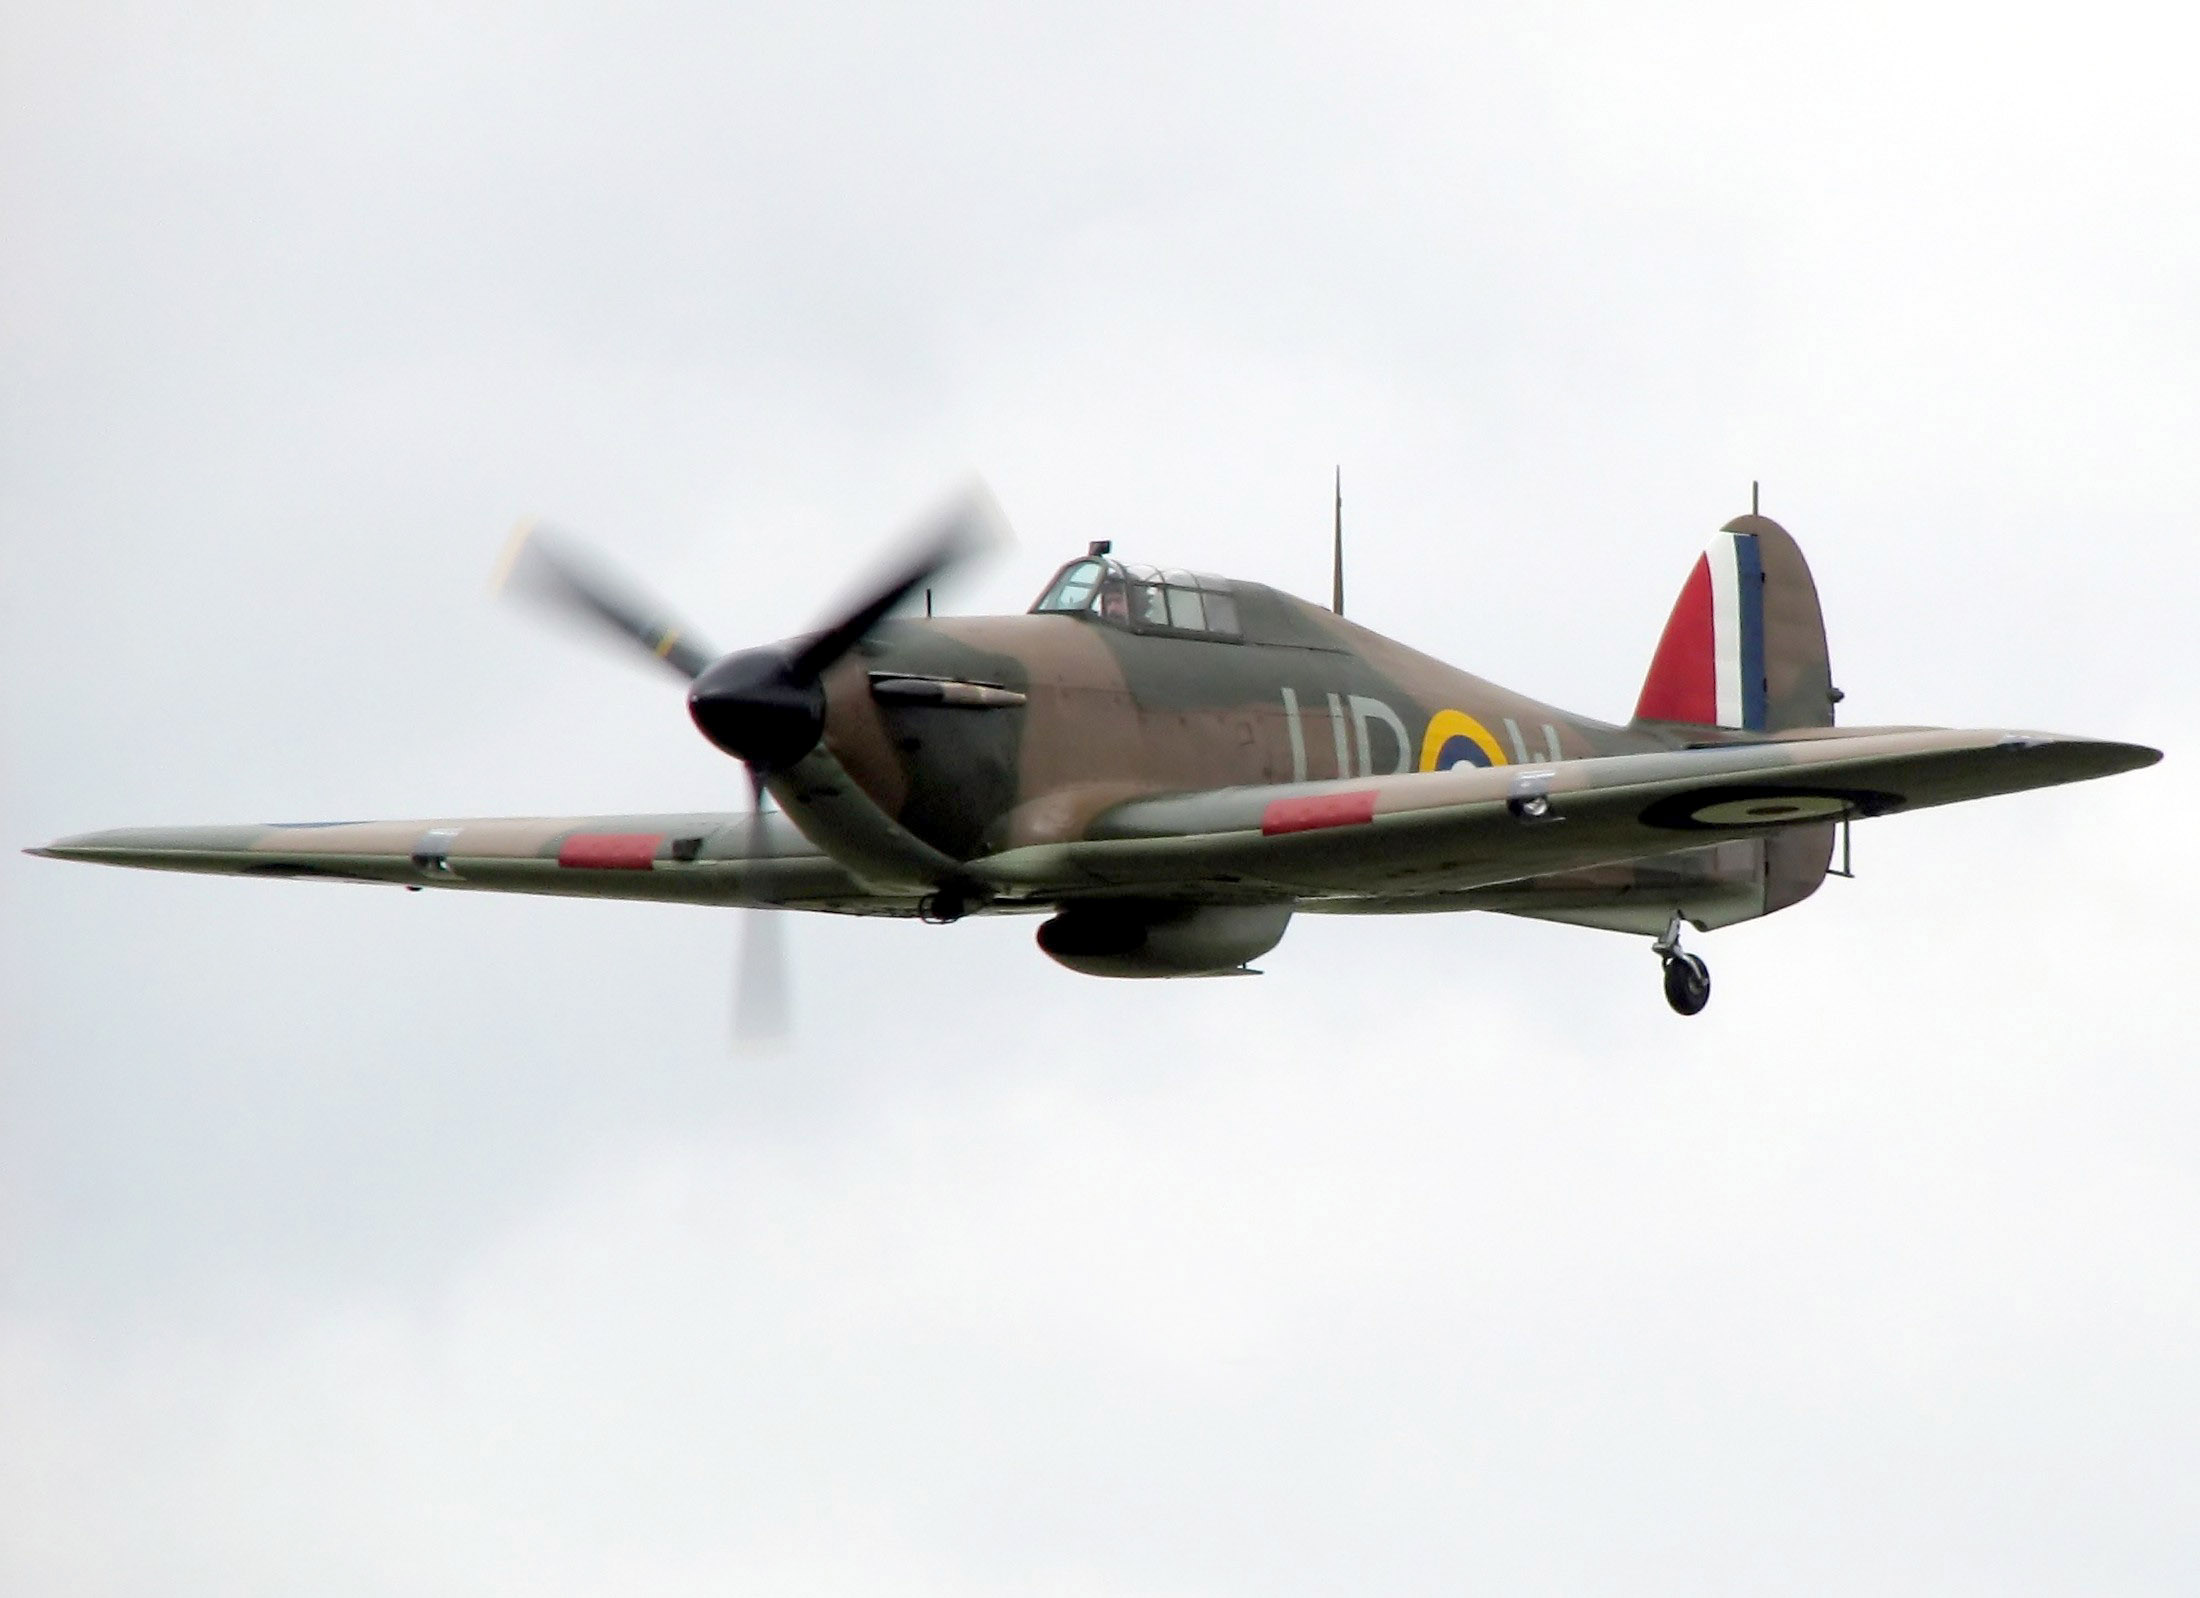 The Hurricane was designed as fighter. The Typhoon was to be a heavy fighter/ground attacker.